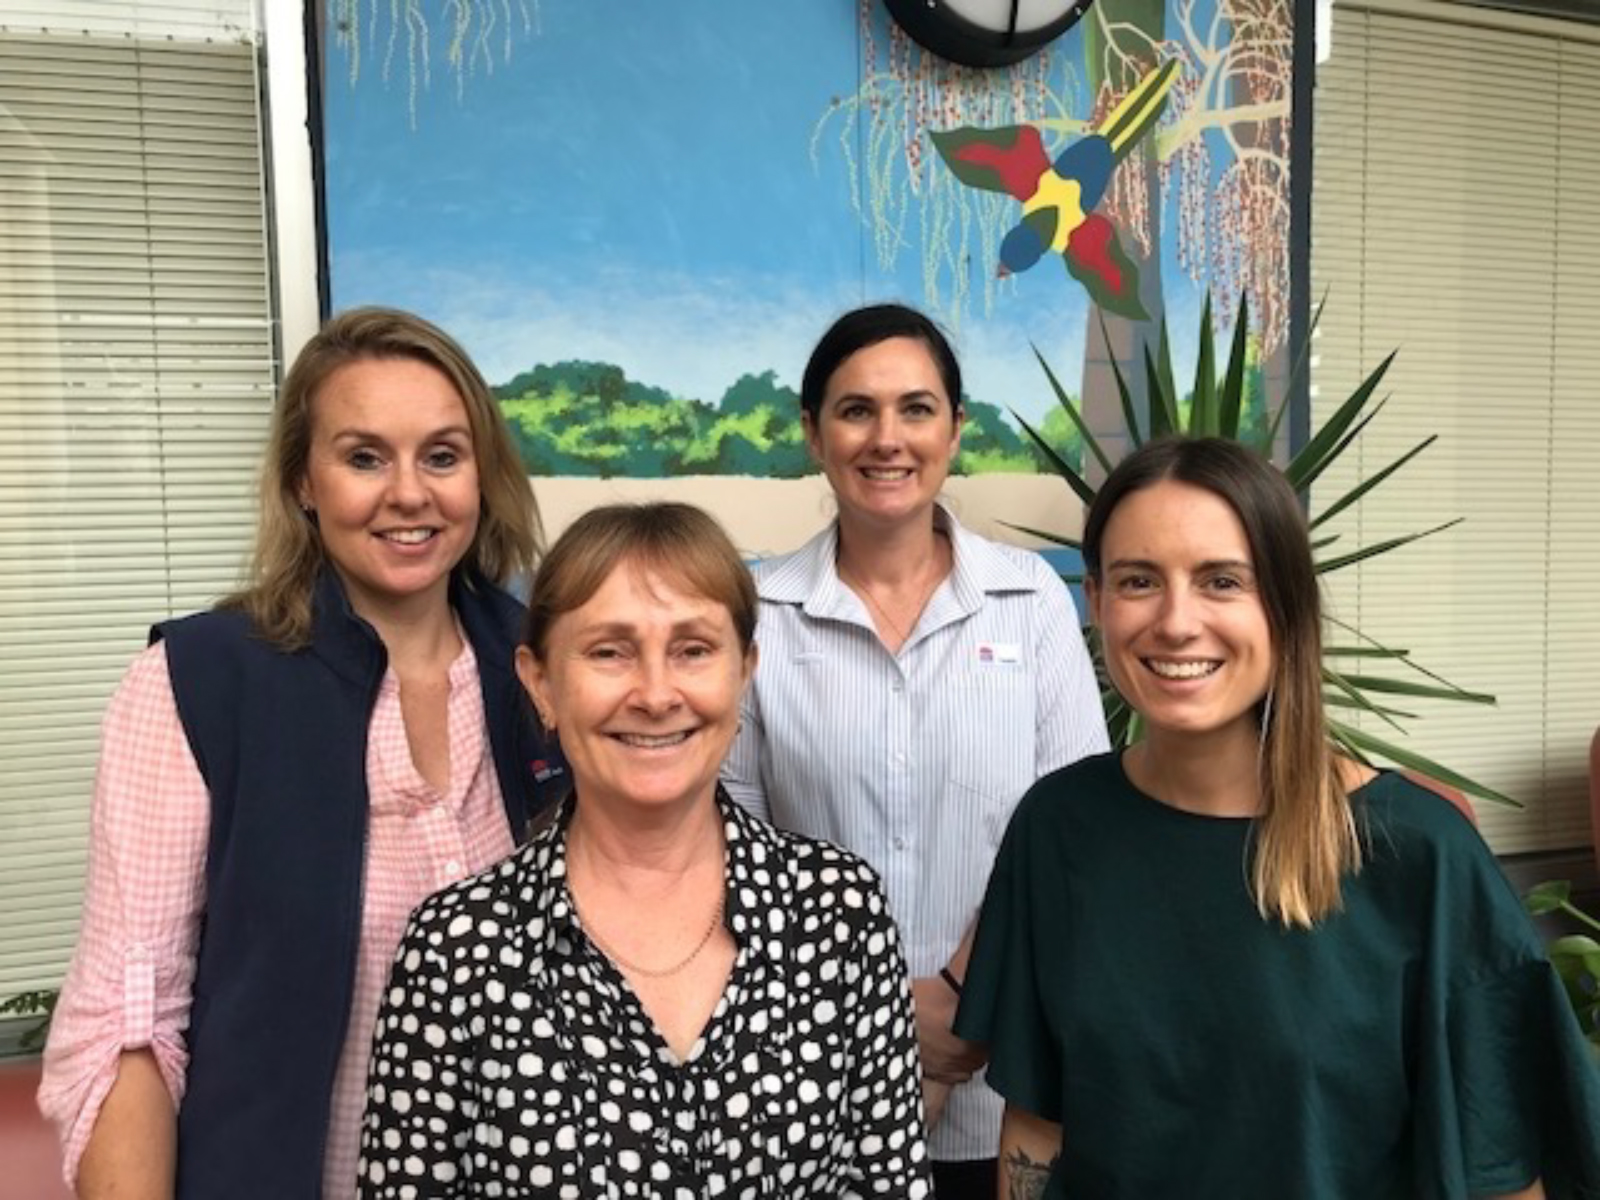 Some of the team members of the Kurrajong Smoke-free project. From left: Jennifer Migalic, RN; Julie Butler, CNS2; Lauren Maguire NUM, and Cassandra Porter, CNS1.